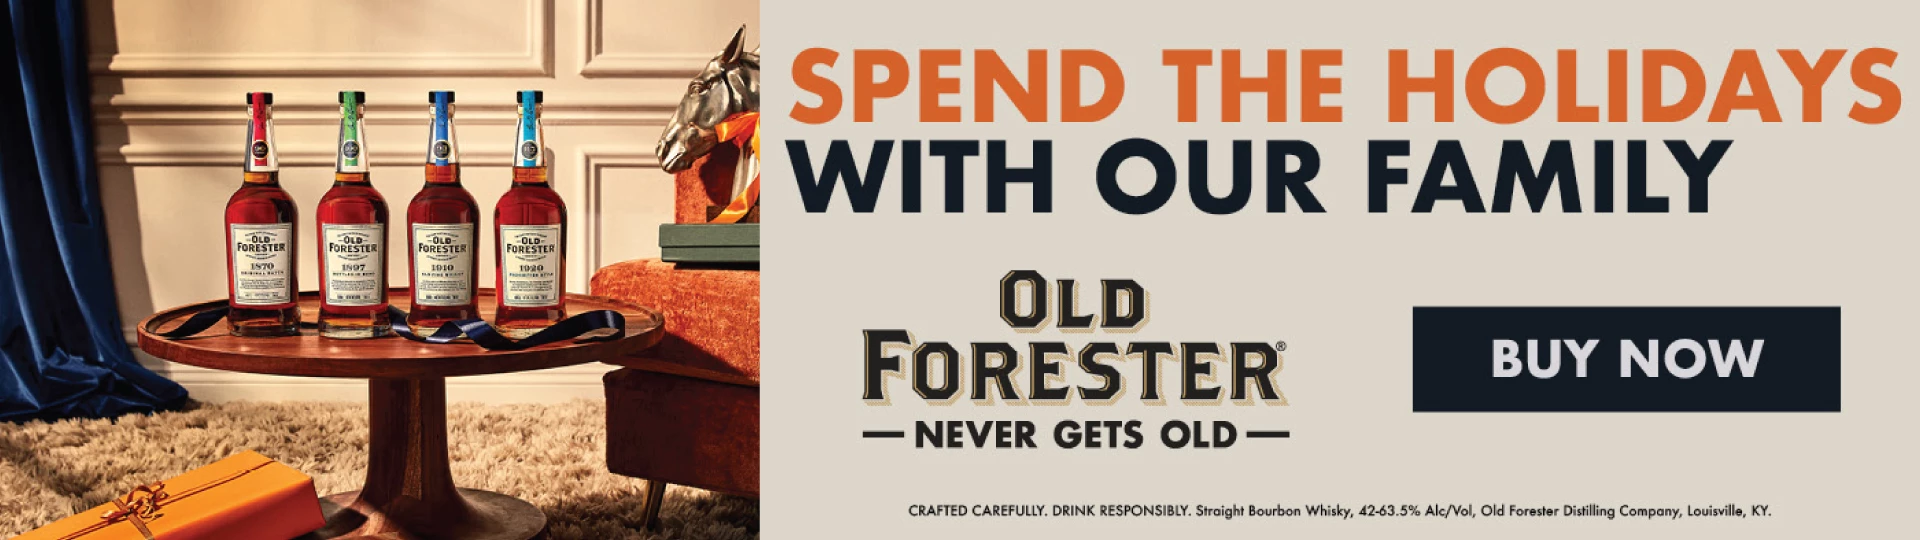 Old Forester Holiday